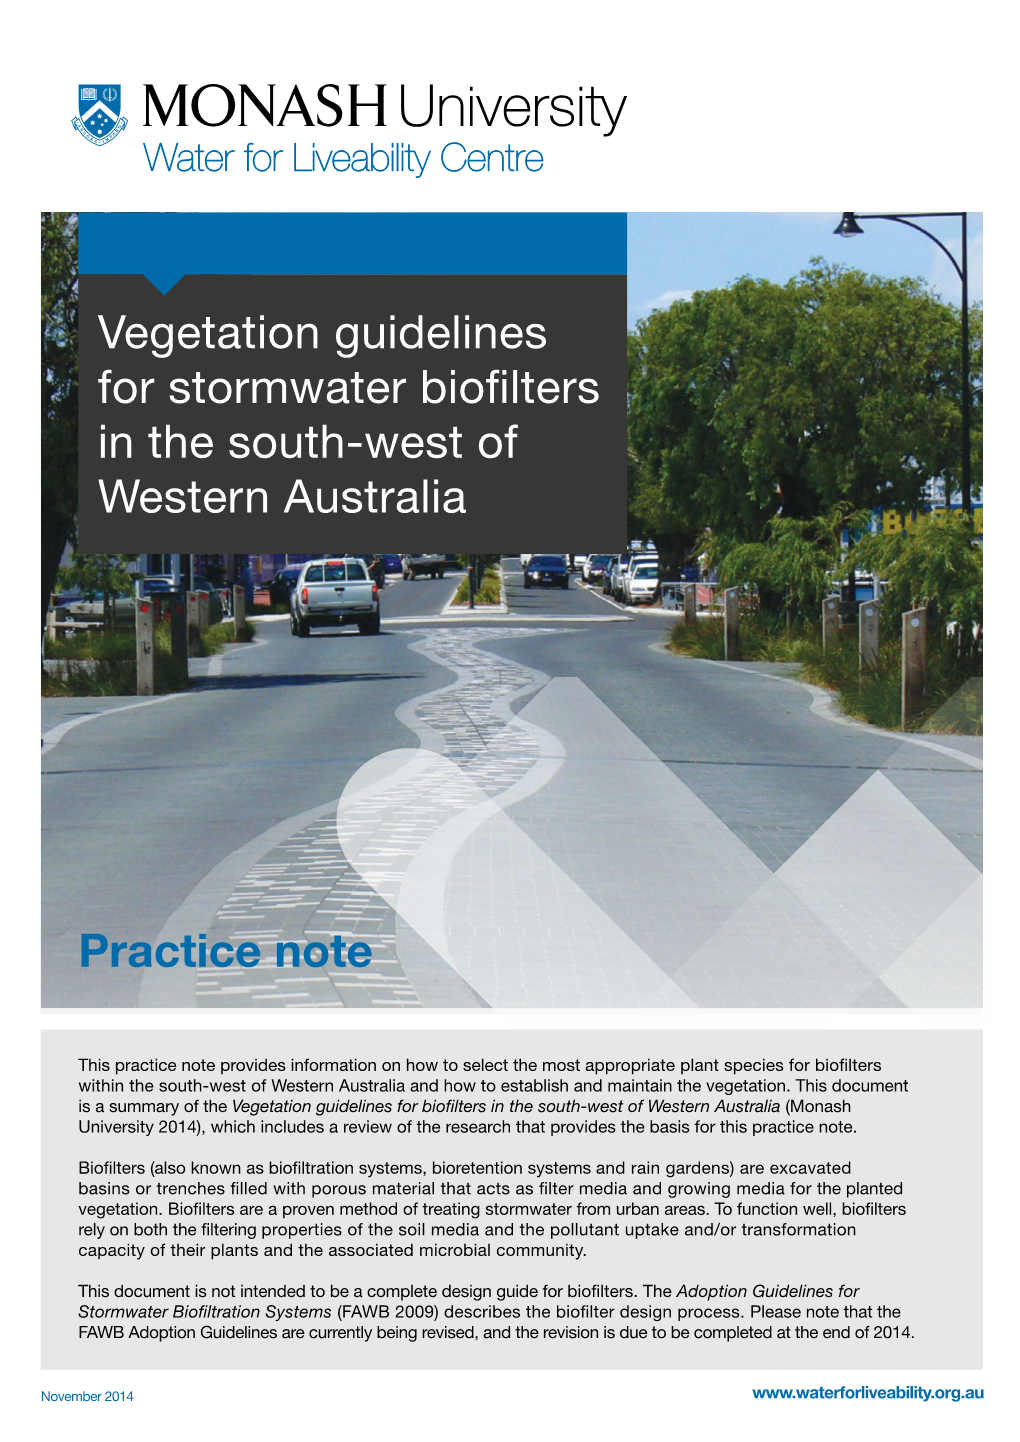 Vegetation Guidelines for Stormwater Biofilters in the South-West of Western Australia